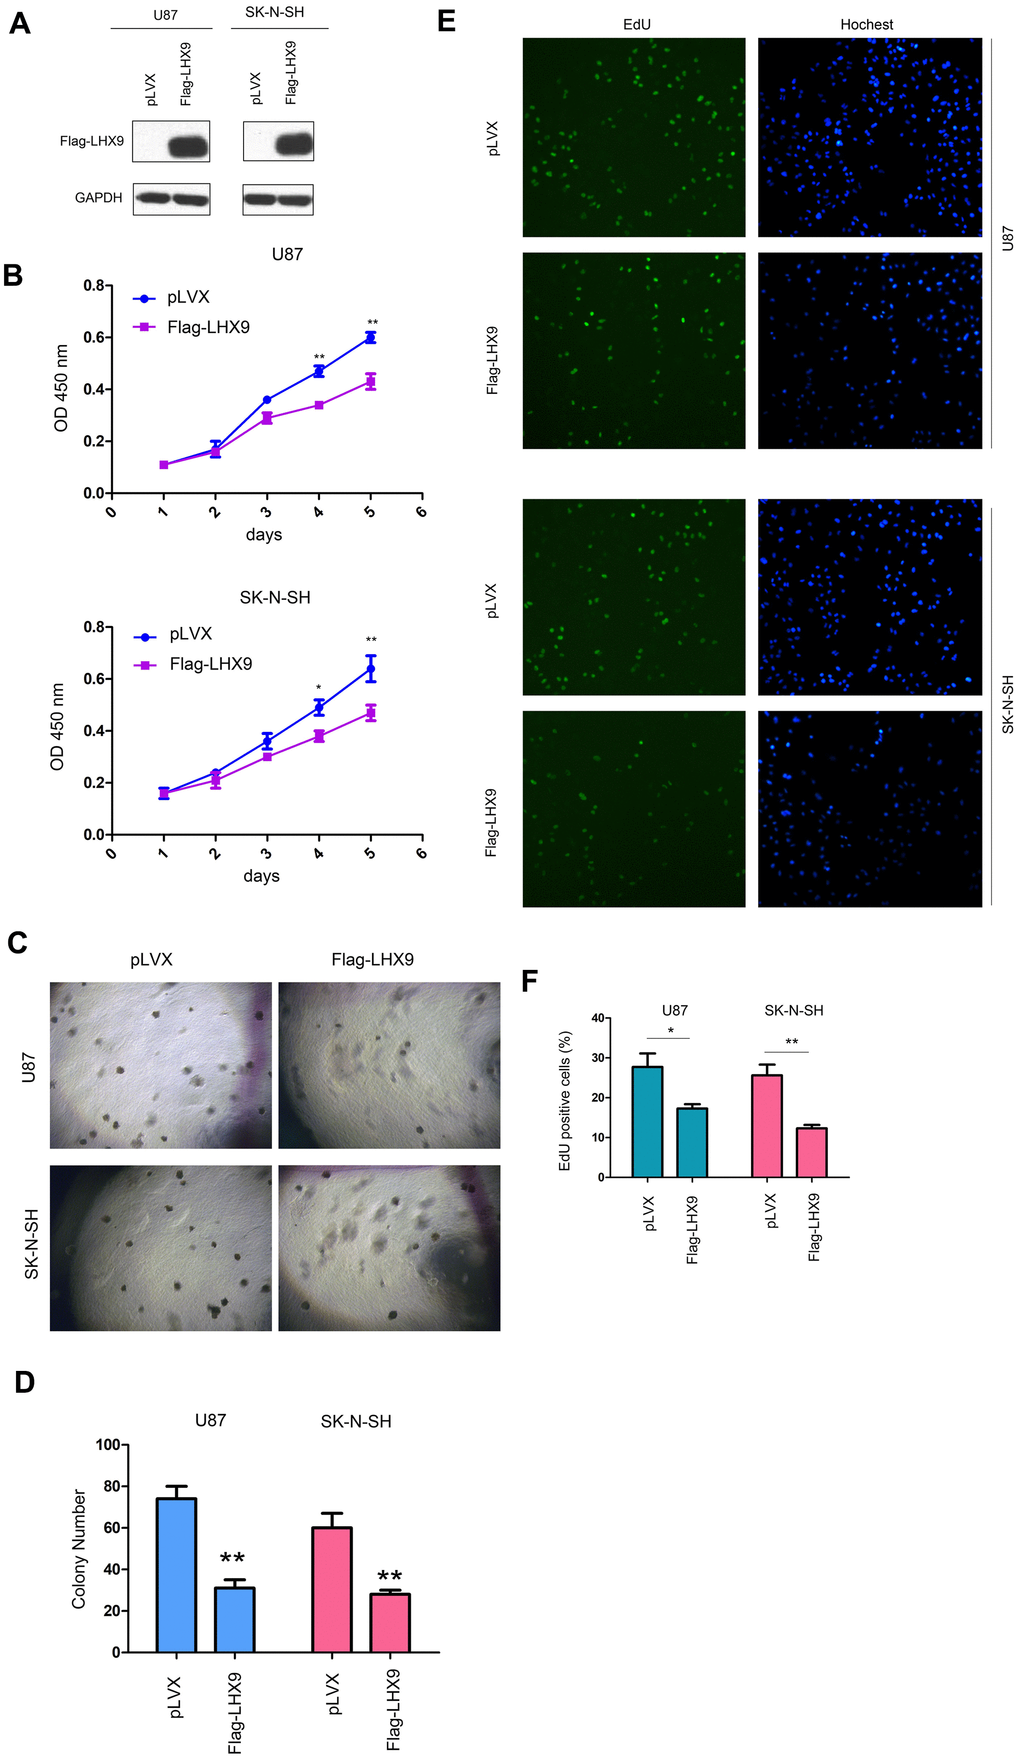 LHX9 overexpression inhibited the growth of glioma cells. (A) Overexpression of Flag-labeled LHX9 in U87 and SK-N-SH cells. Flag-LHX9 expression plasmid was transfected into U87 and SK-N-SH cells using lipofectamine 2000. Cells were screened with puromycin for 1 week, and then Flag-LHX9 expression was identified. (B) The effect of LHX9 expression on the growth of U87 and SK-N-SH cells was detected by CCK8 assay. (C, D) The effect of LHX9 expression on the anchorage-independent growth of U87 and SK-N-SH cells was detected by soft agar assay. (E, F) The EdU assay was performed. Details about the EdU assay were described in the “Materials and methods”. *, PP